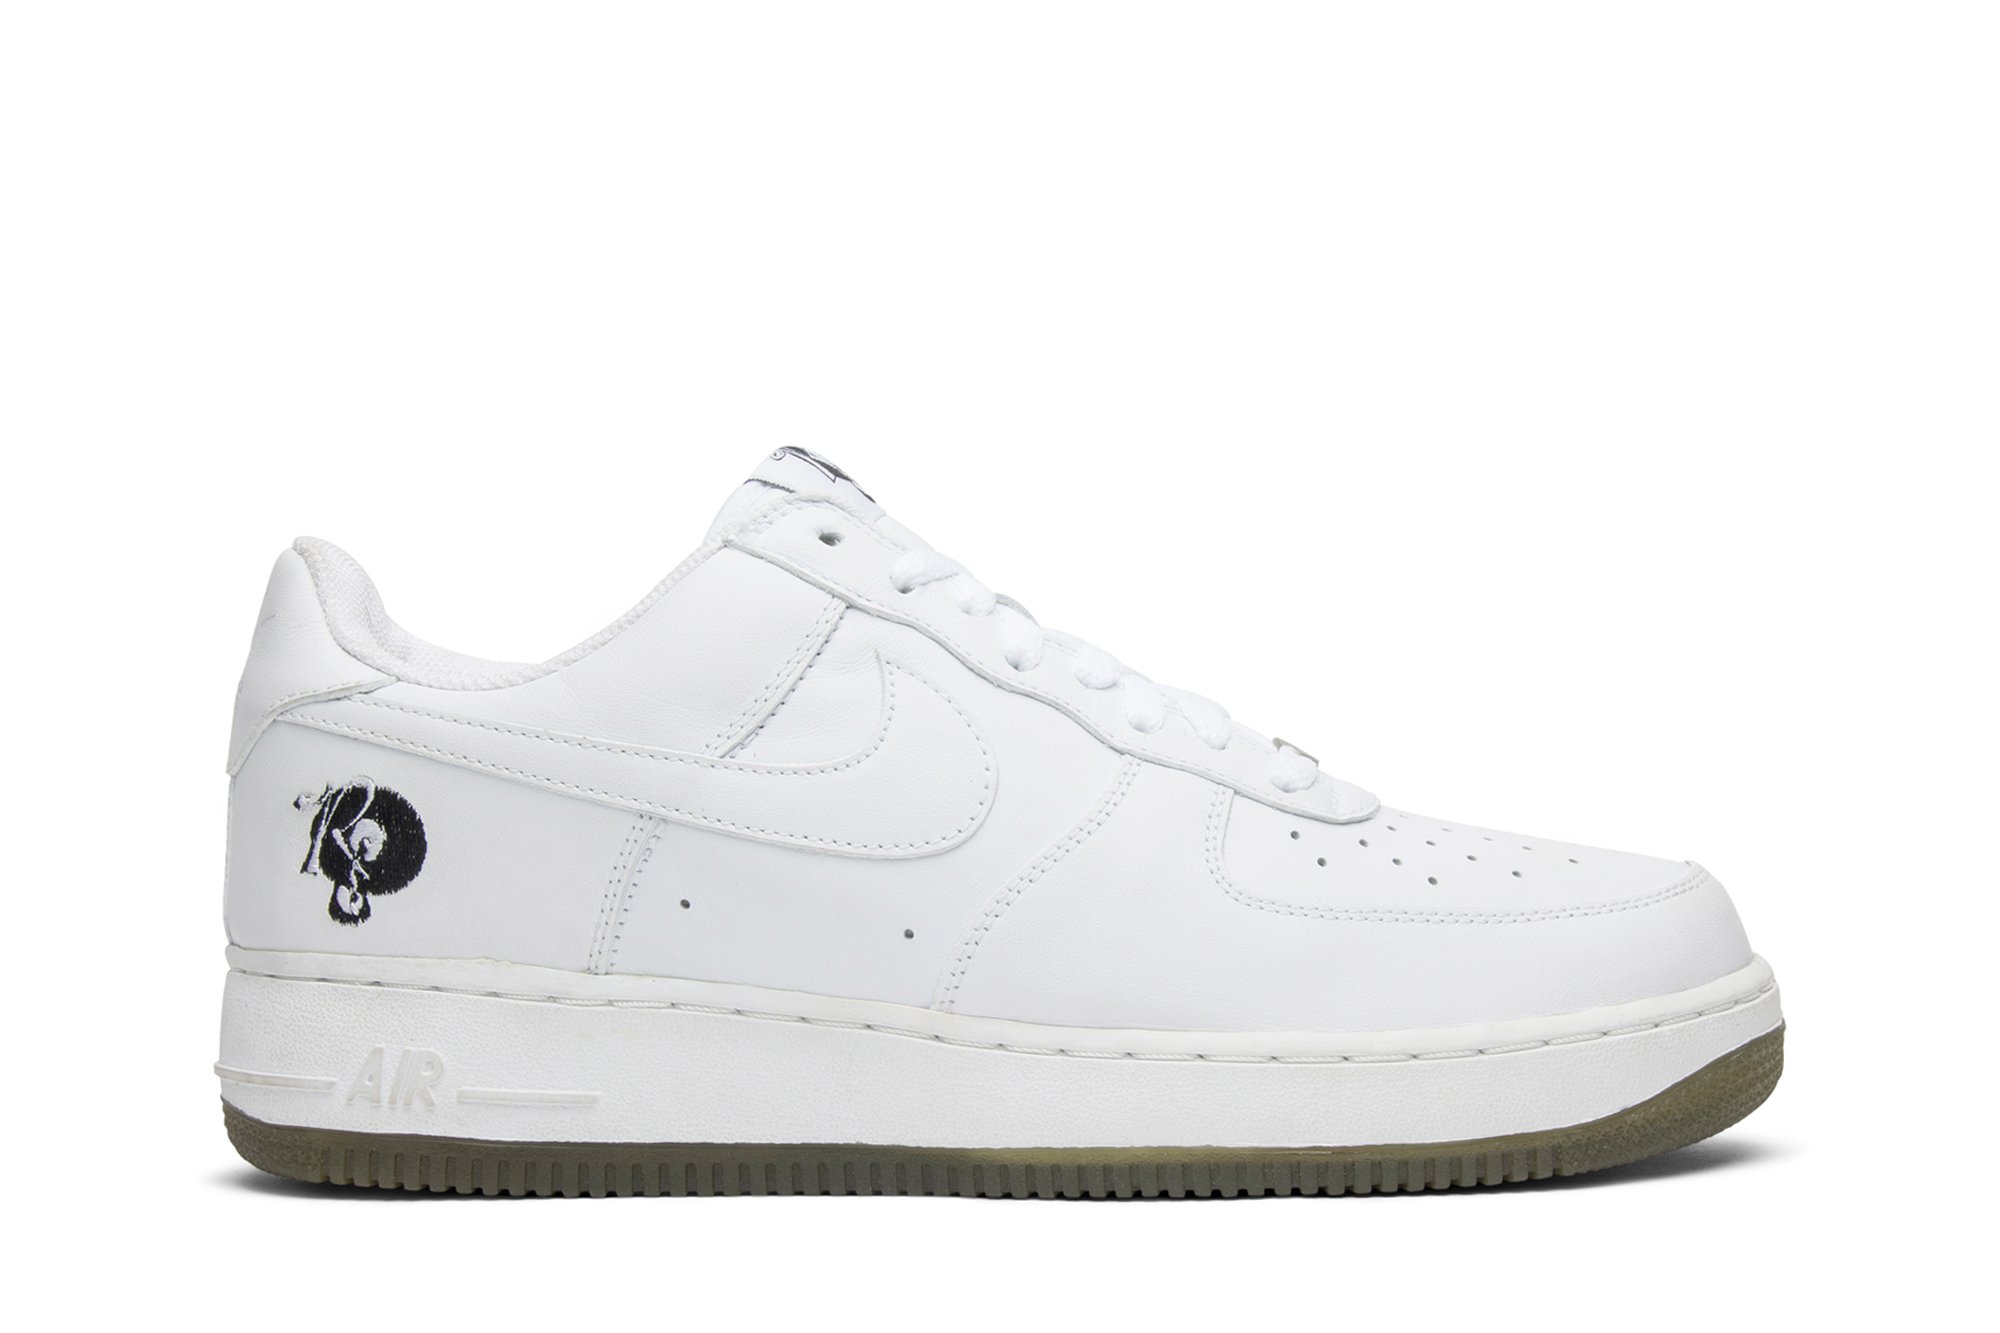 rocafella air force 1 price